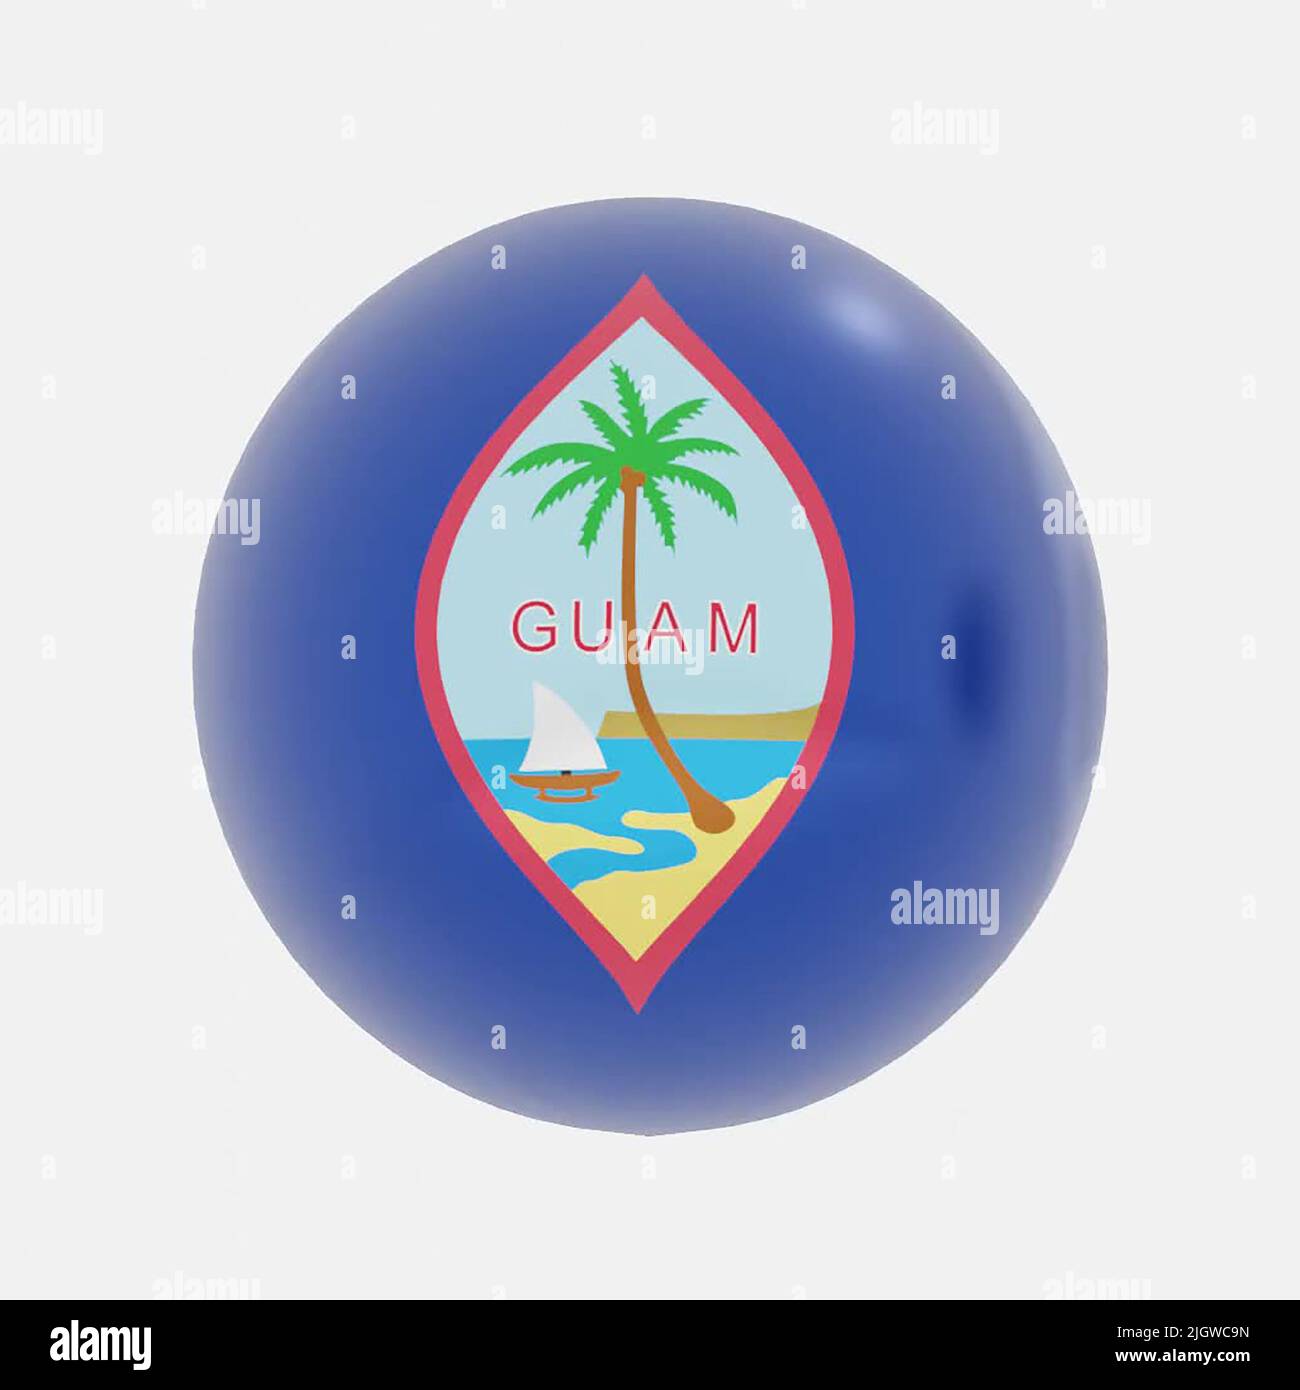 3d render of globe in Guam flag for icon or symbol. Stock Photo